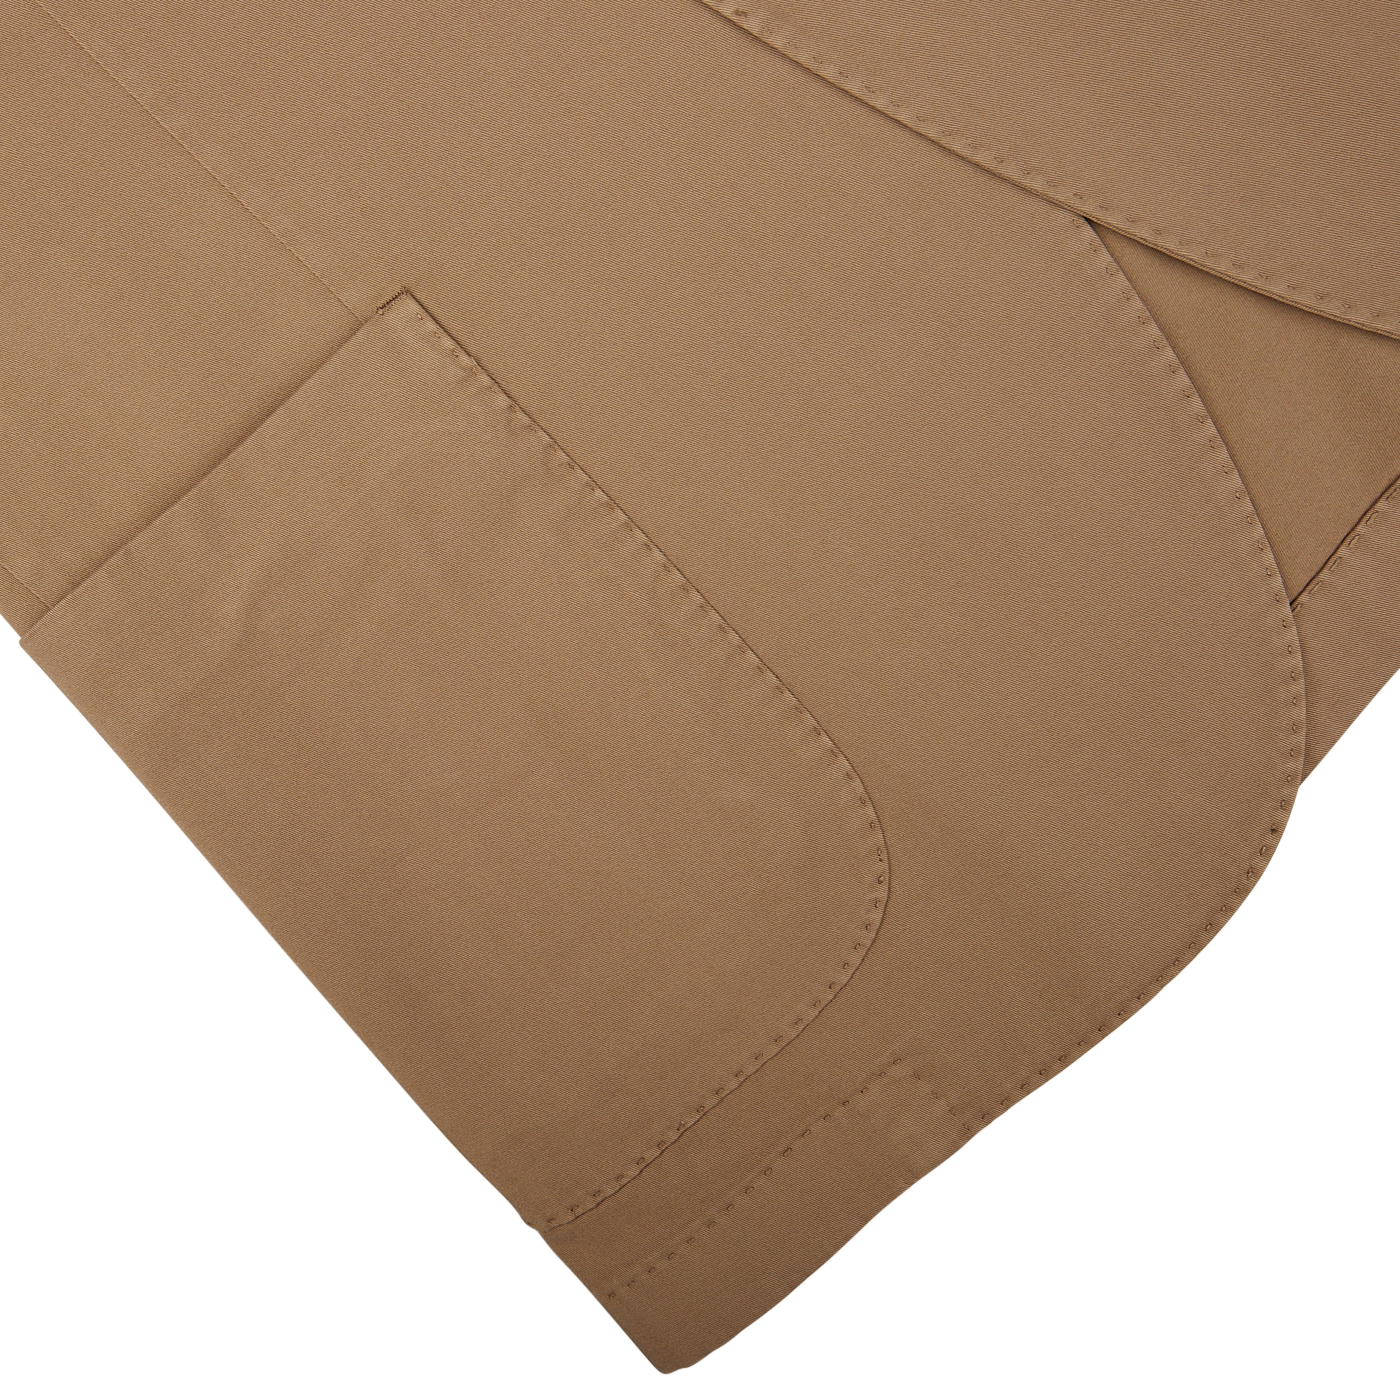 Three overlapping Tobacco Brown Washed Cotton K Jackets with visible stitching on a white background, showcasing unstructured craftsmanship from Boglioli, Italy.